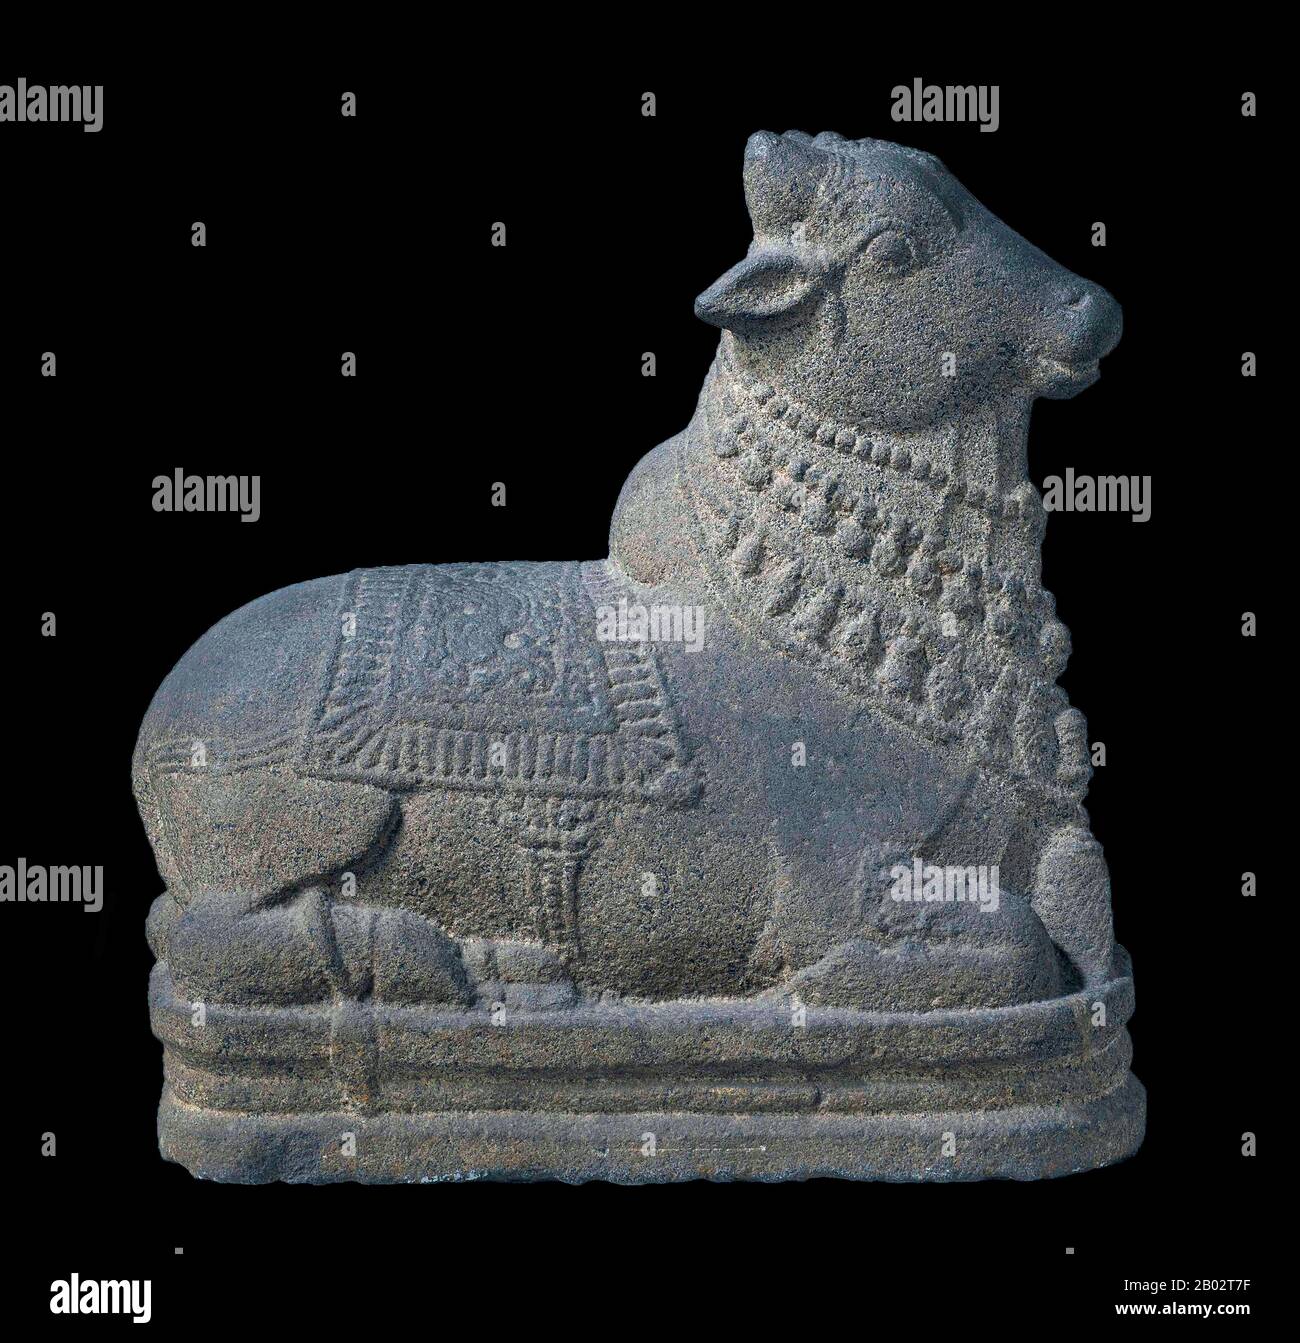 Nandi or Nandin (Tamil: நந்தி Sanskrit: नंदी) is the name for the bull which serves as the mount (Sanskrit: vāhana) of Shiva and as the gate keeper of Shiva and Parvati in Hindu mythology.  Temples venerating Shiva and Parvati display stone images of a seated Nandi, generally facing the main shrine. There are also a number of temples dedicated solely to Nandi. Stock Photo